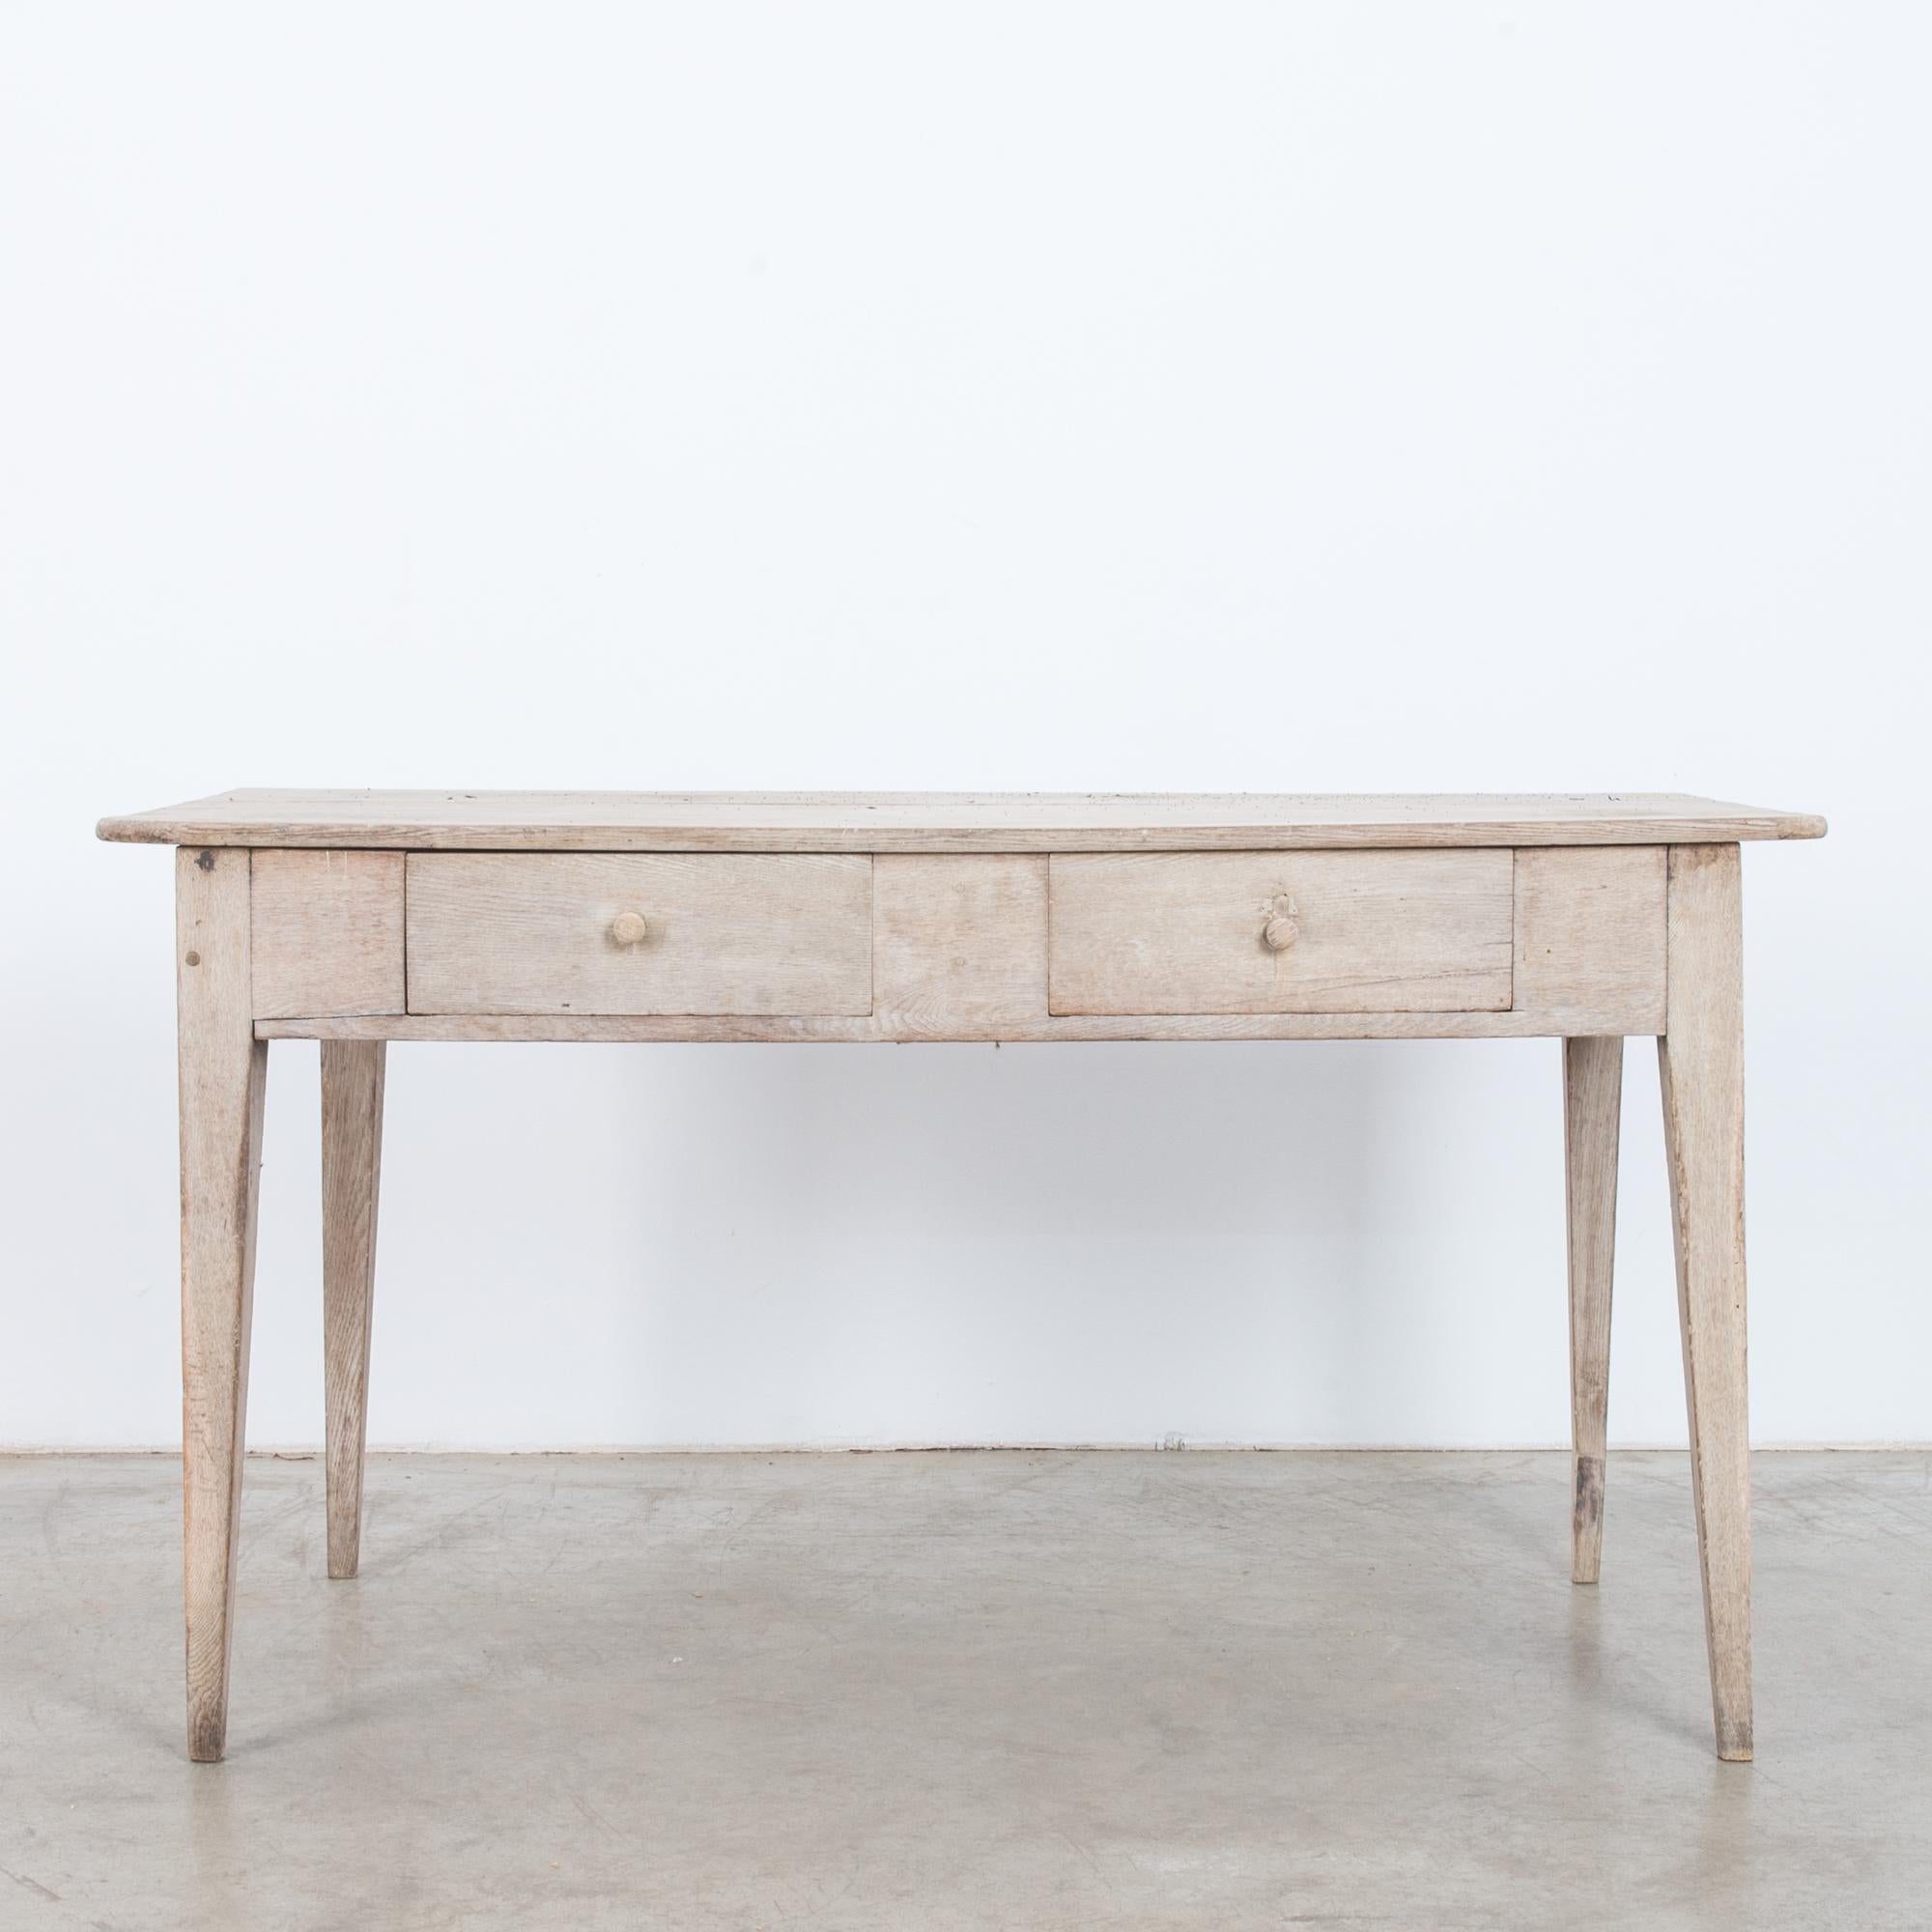 This oak table was made in France, circa 1900. Constructed from clean lines, the tapered, angular legs evoke both simplicity and style. The table houses two drawers and displays a beautifully weathered patina. Perfect as a writing table for your